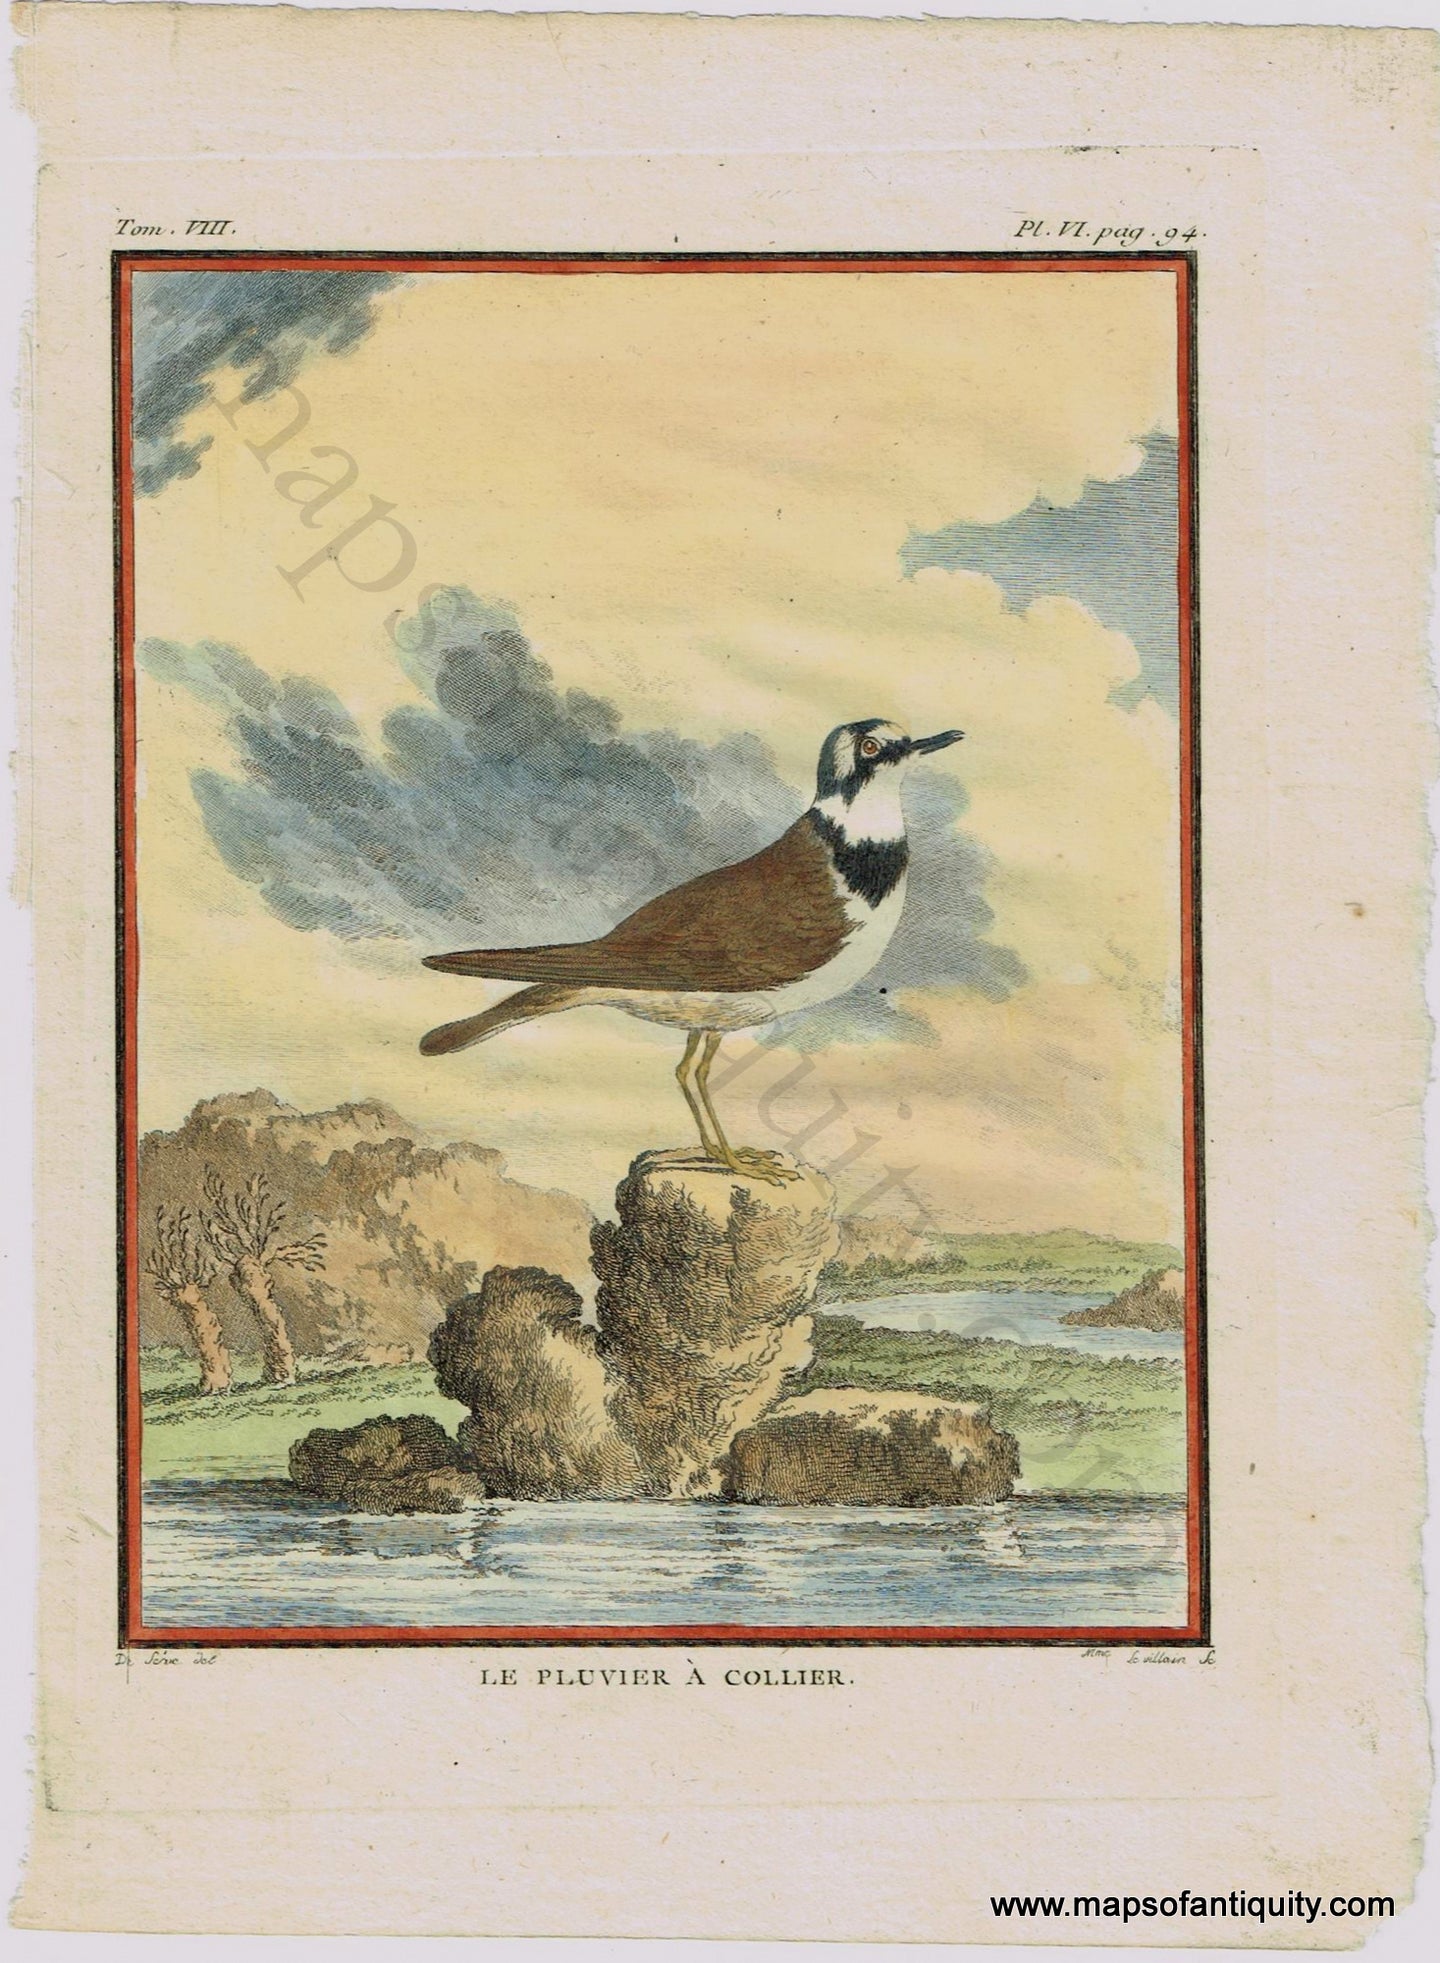 Antique-Print-Prints-Engraved-Engravings-Illustrated-Illustrations-Hand-Colored-Coloring-Natural-History-Bird-Birds-Birding-Common-Ringed-Plover-Buffon-1780-1780s-1700s-Late-18th-Century-Maps-of-Antiquity